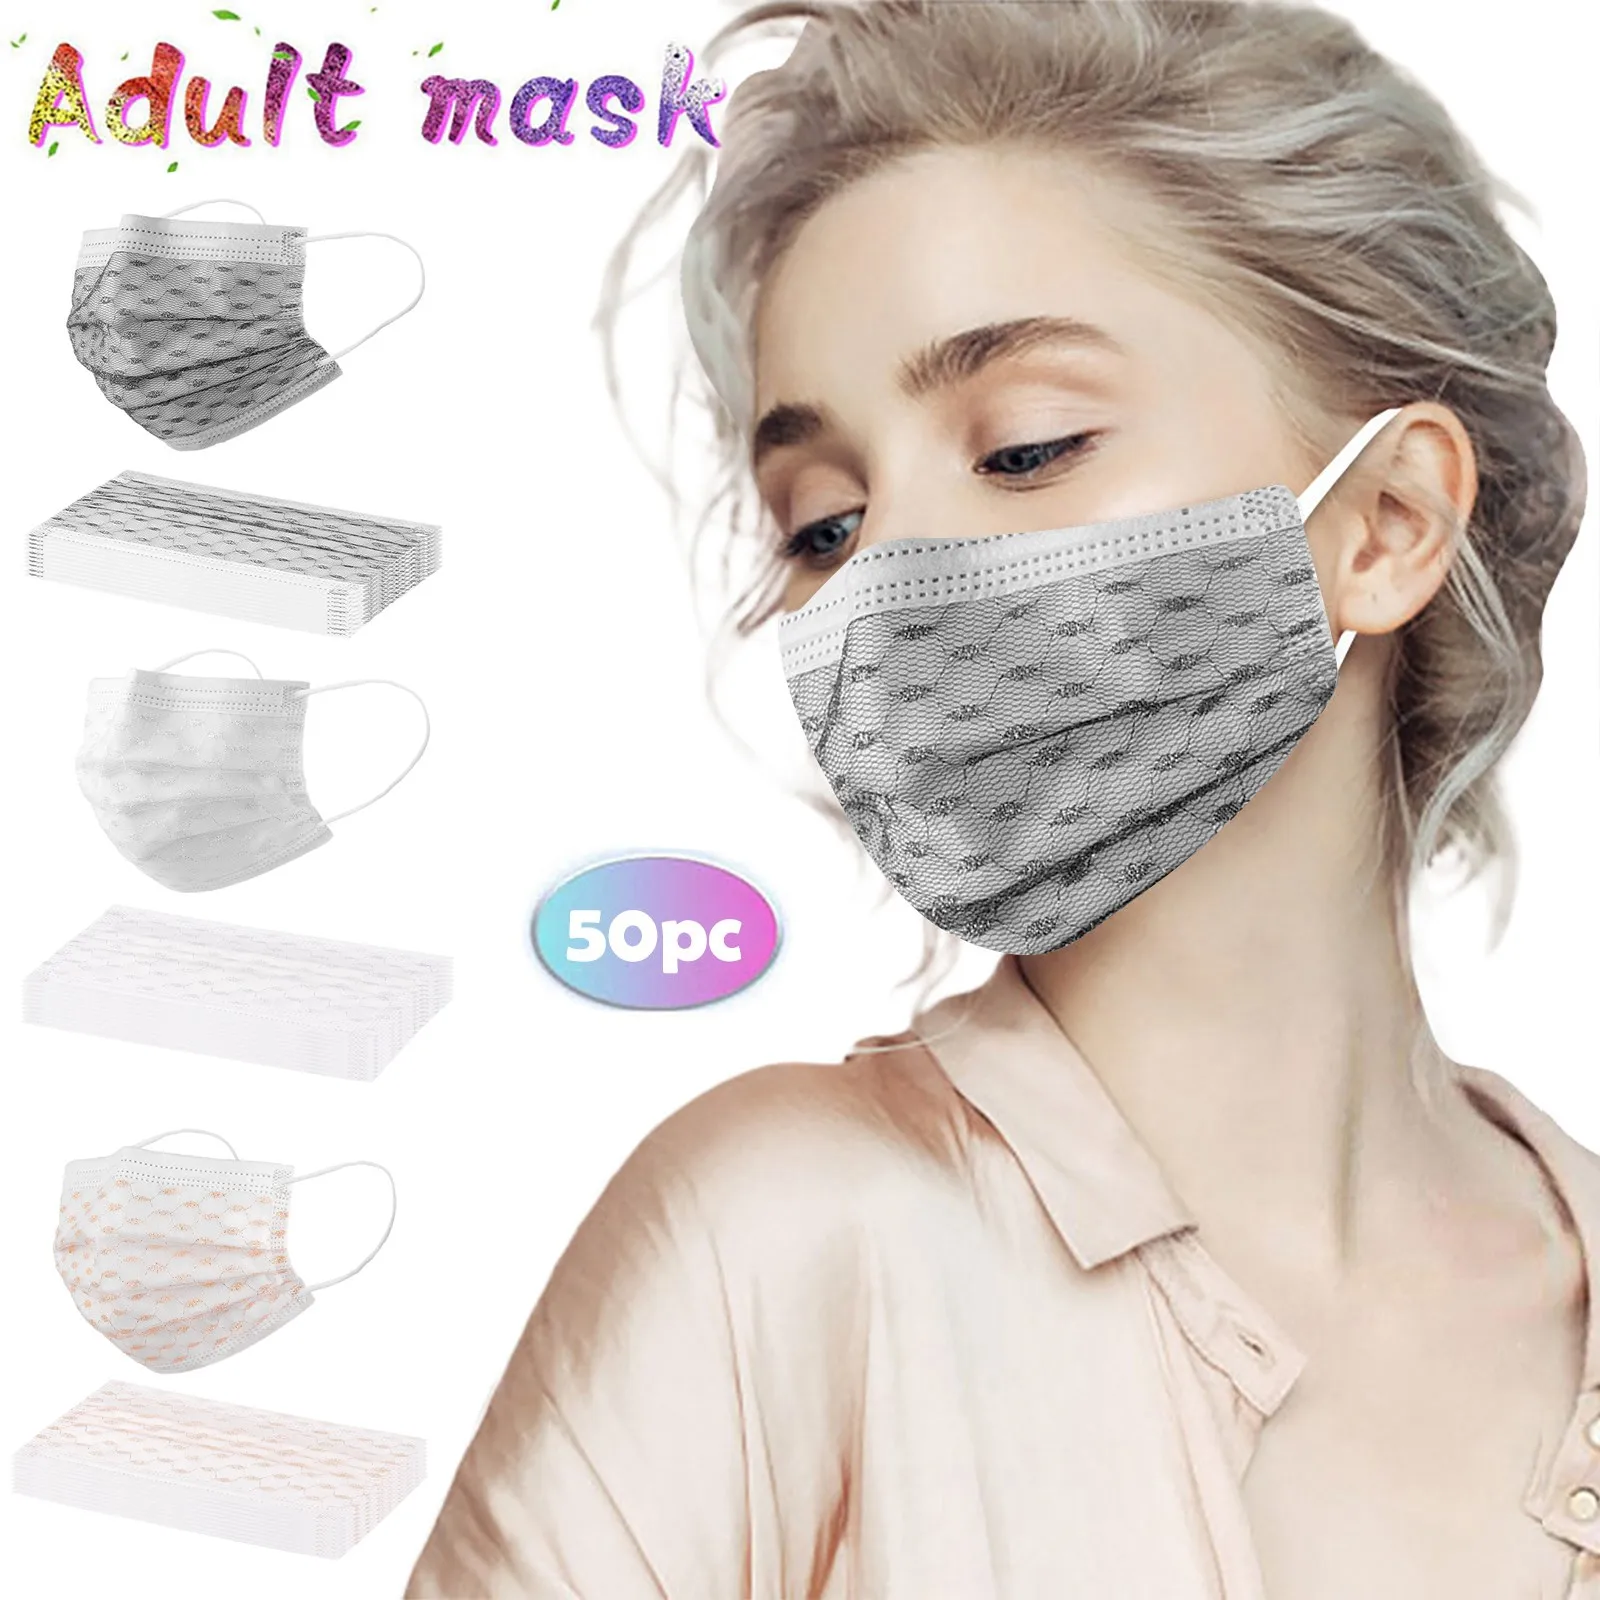 

10/50pc Halloween Cosplay Mascarillas Desechables Disposable Face Mask Adults 4ply Face Masks Fashion Masque Jetables Mondkapjes